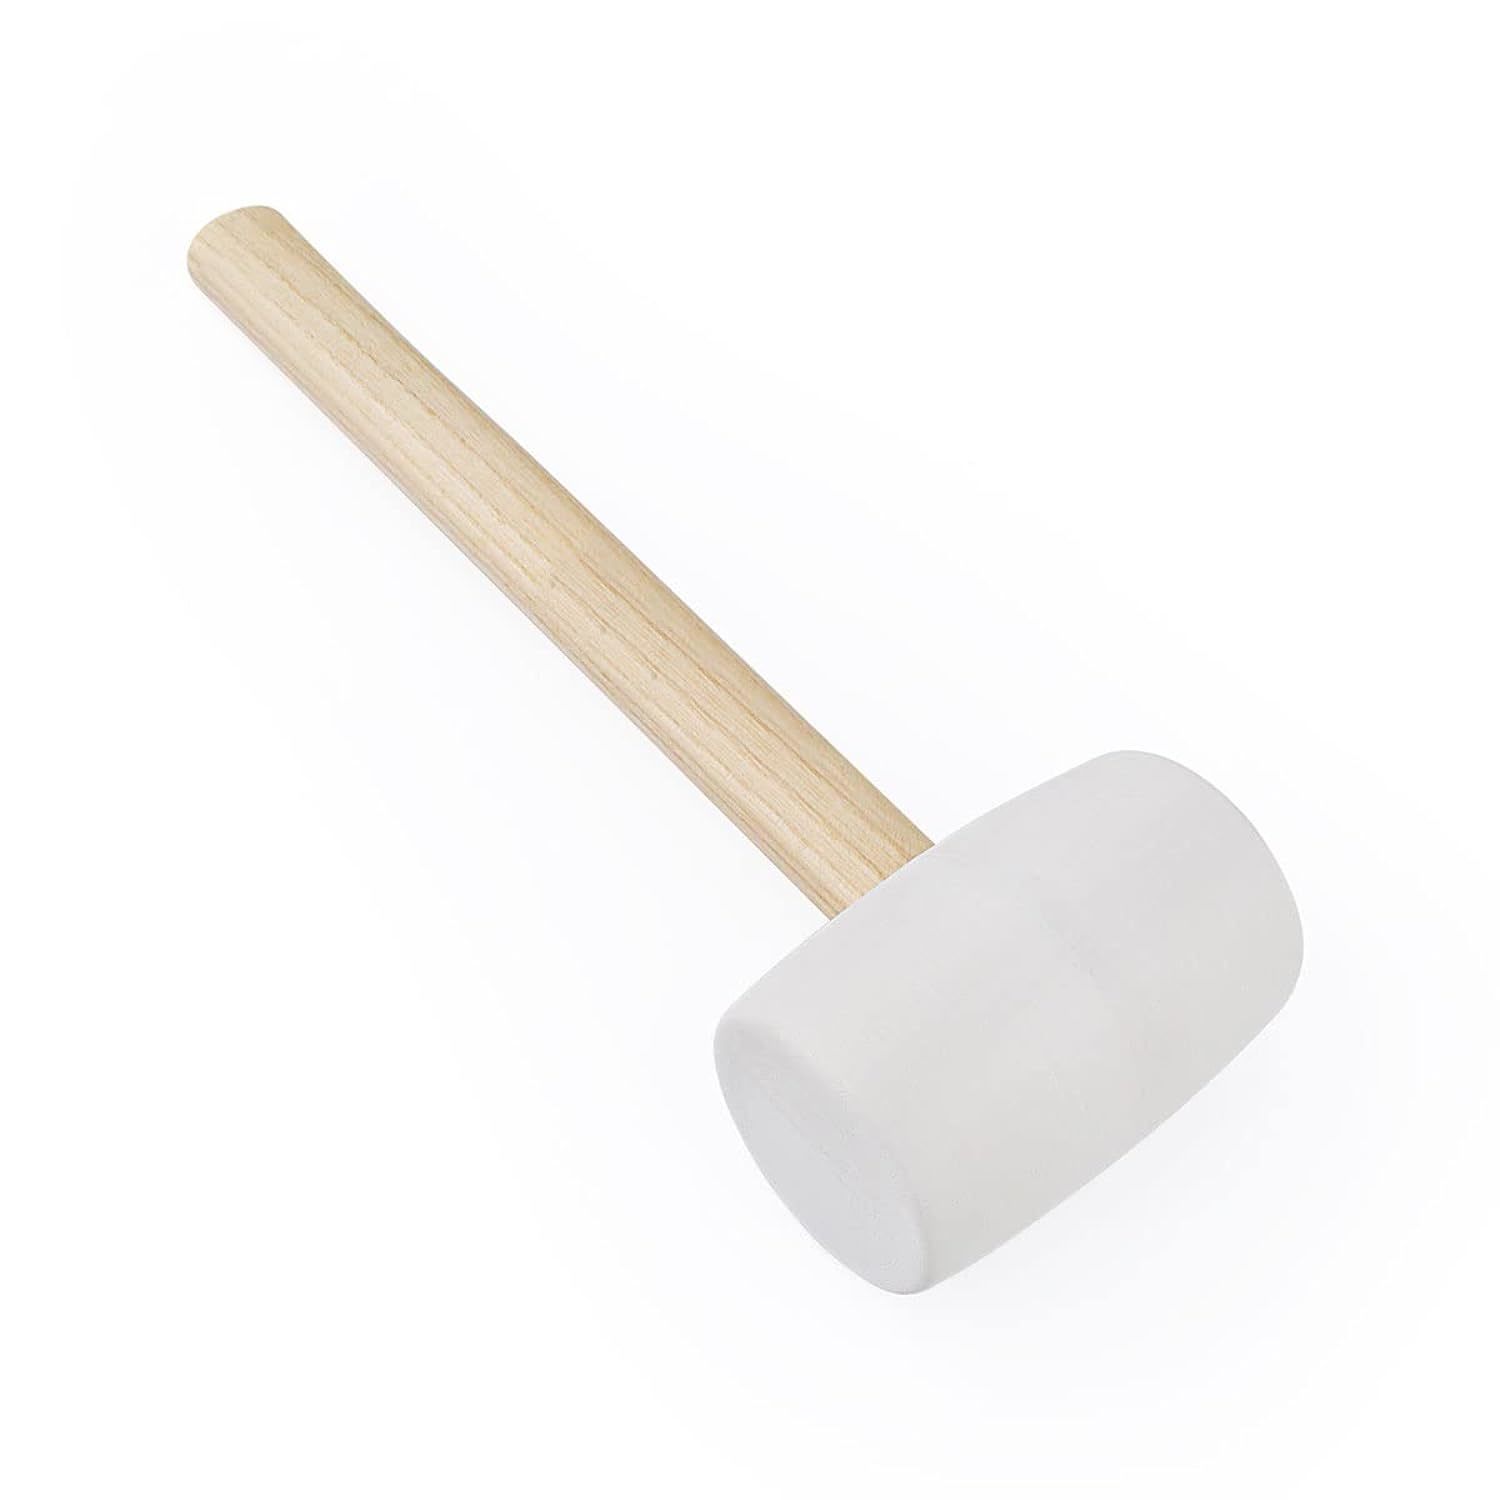 14 Ounce Rubber Mallet, Lightweight Double Face Hammer with Wood Non-Slip  Handle